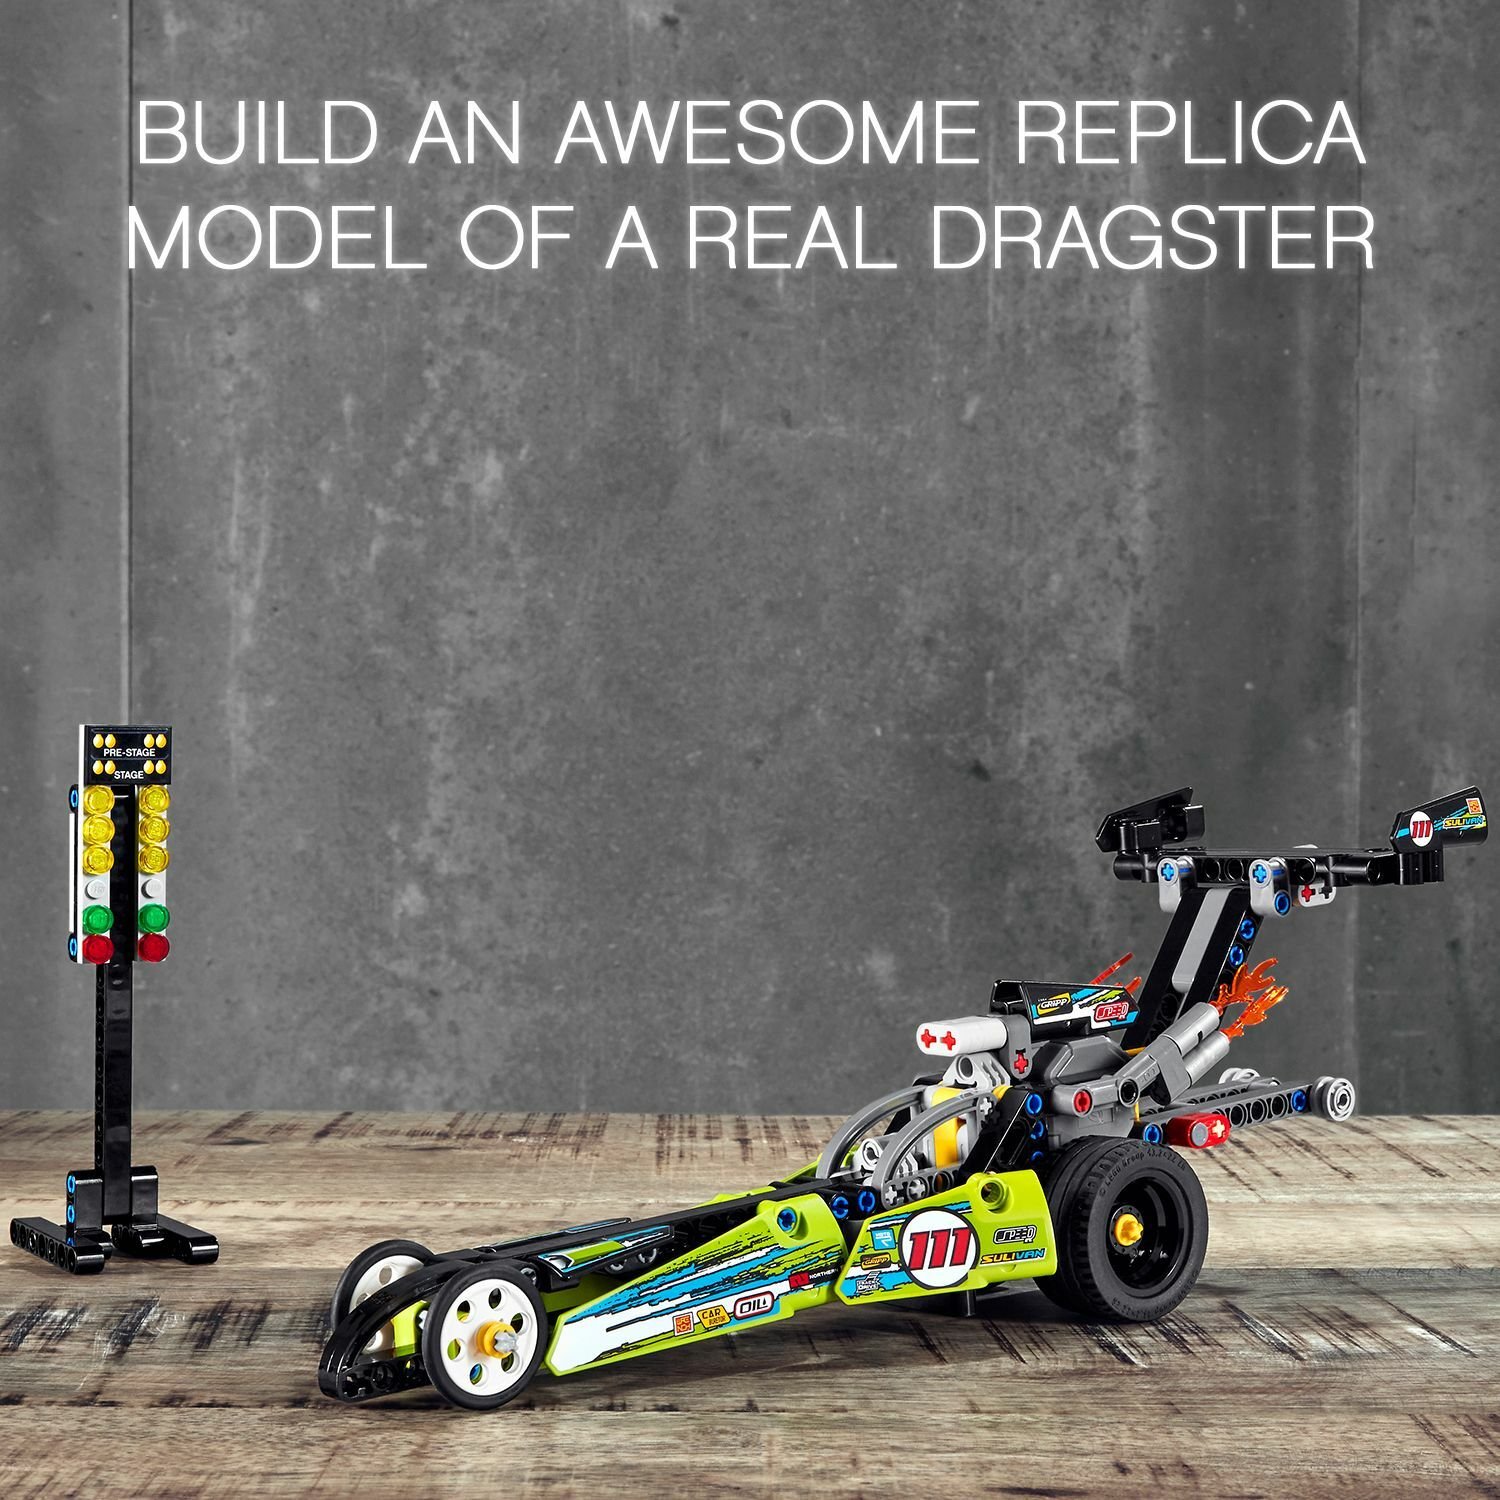 LEGO Technic Dragster Car Toy to Hot Rod 2-in-1 Set Review